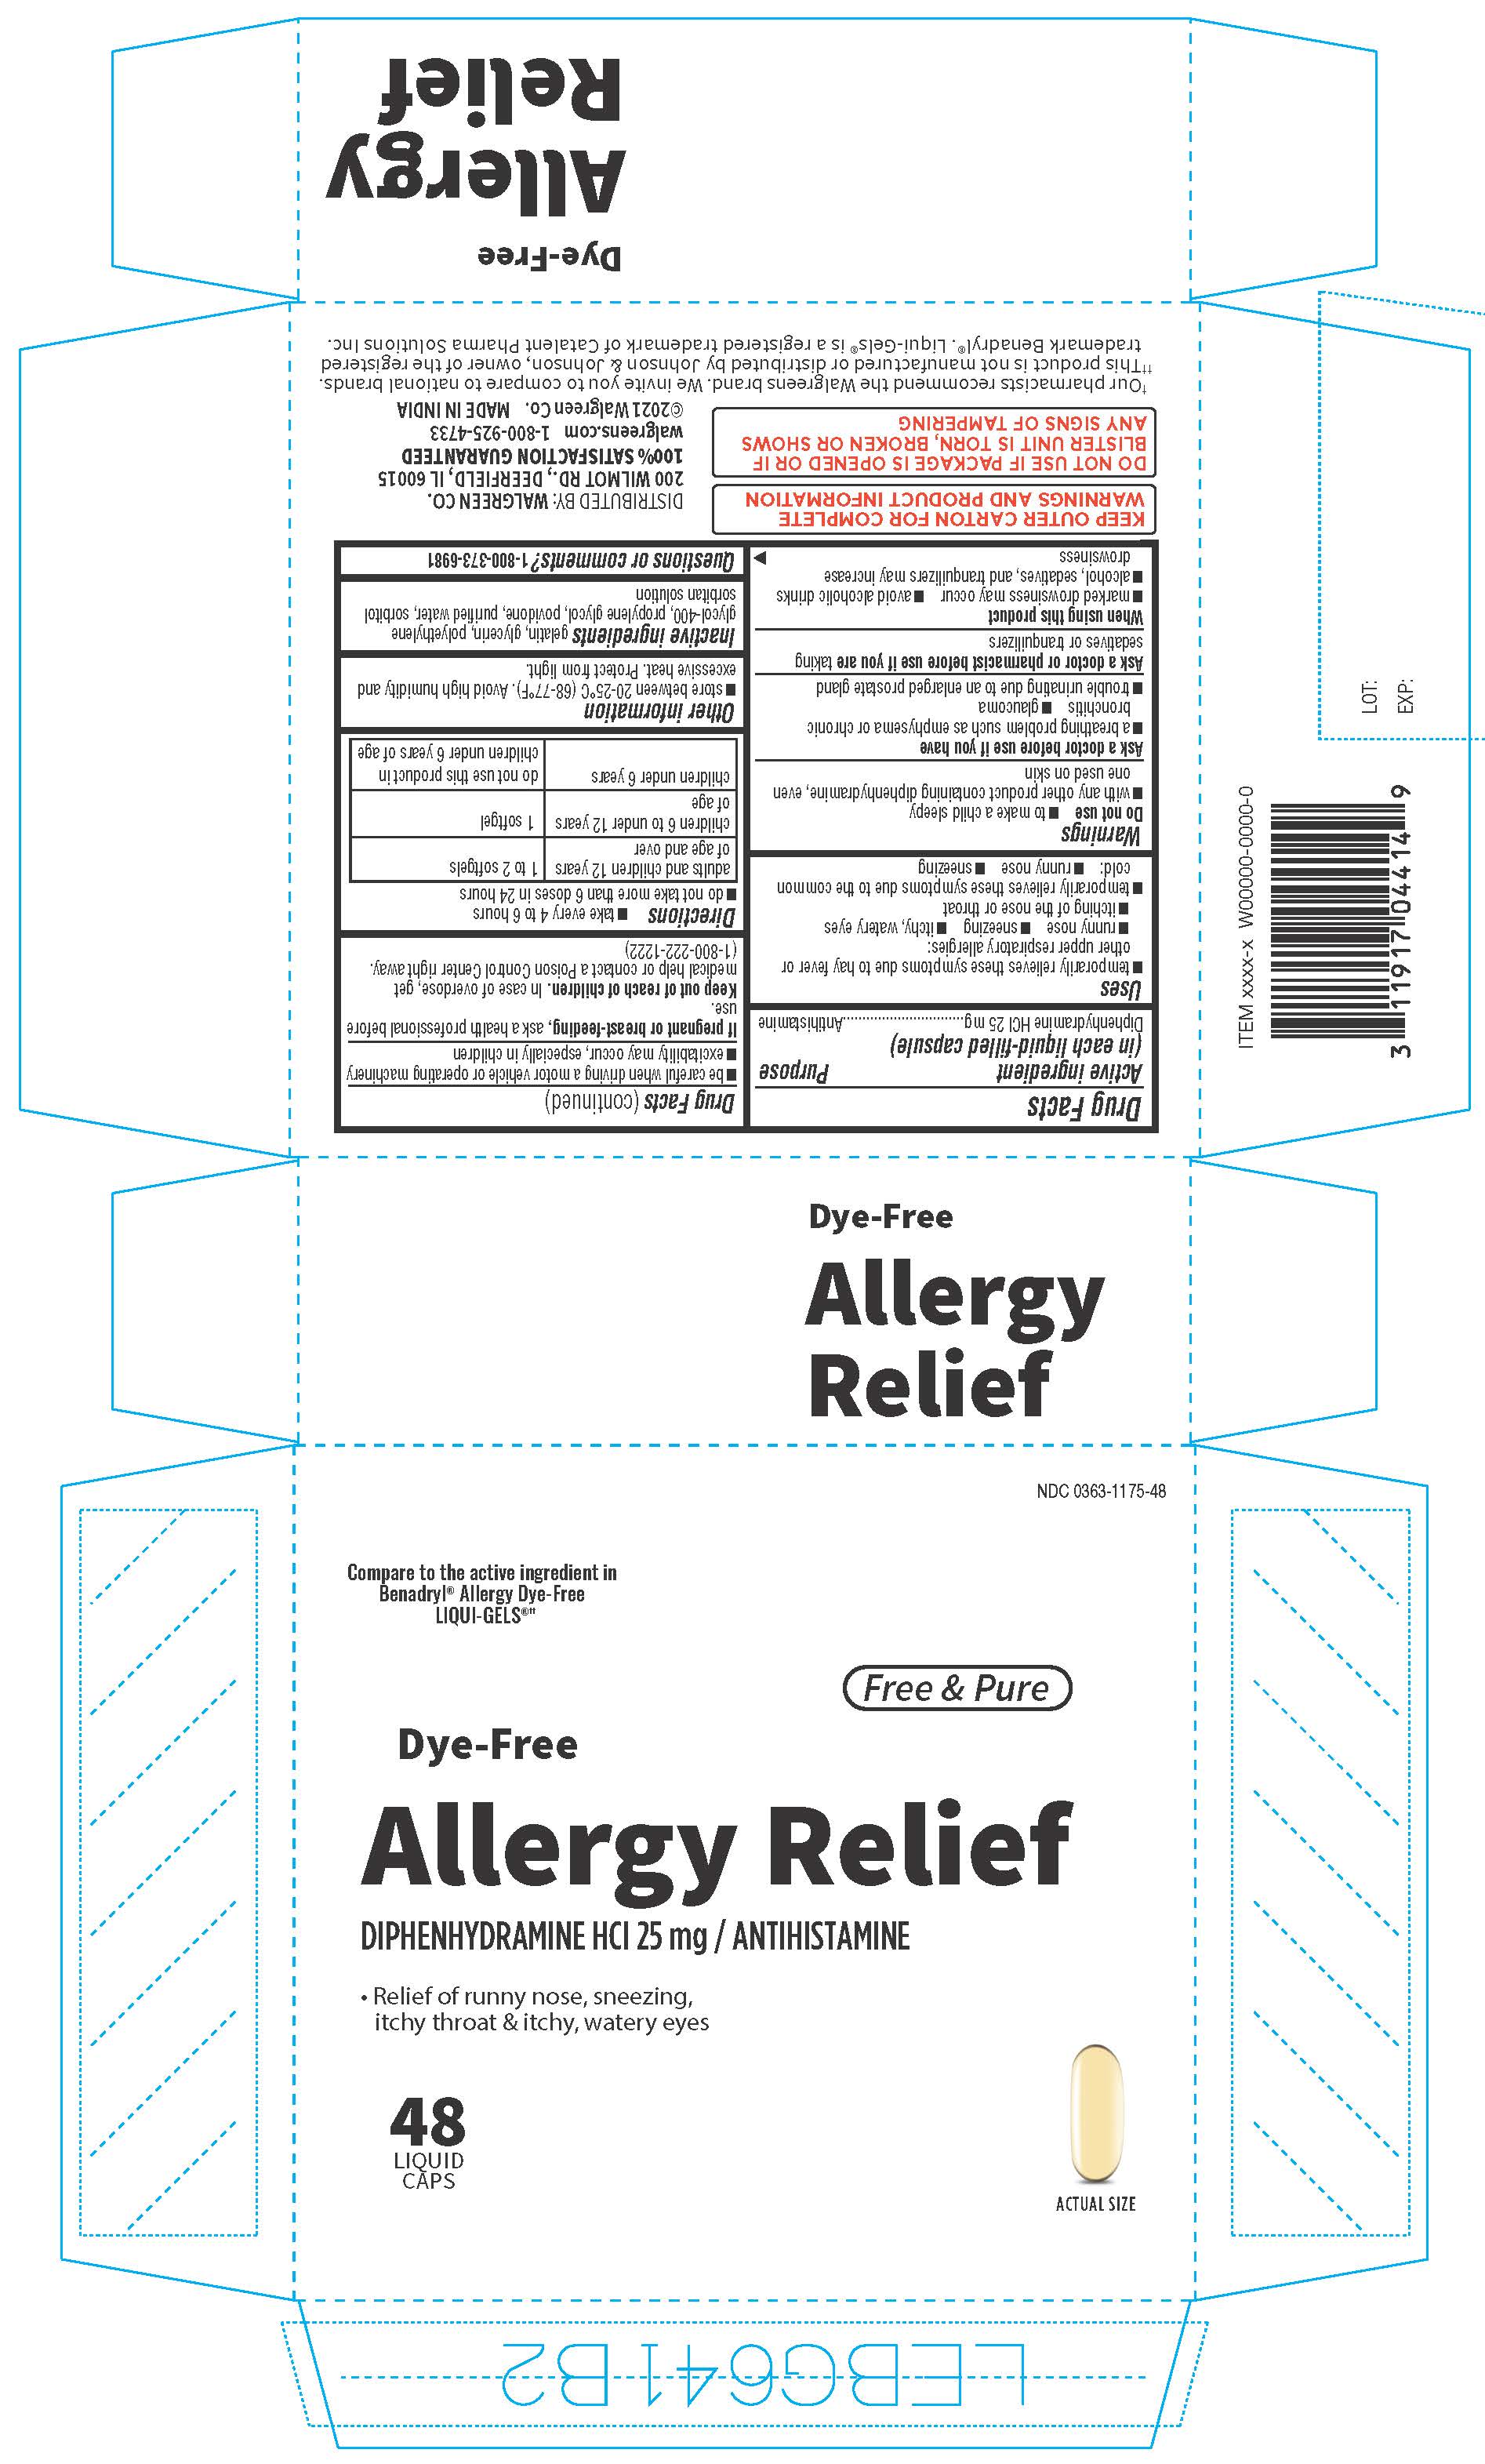 Dye-Free Allergy Relief 48 ct